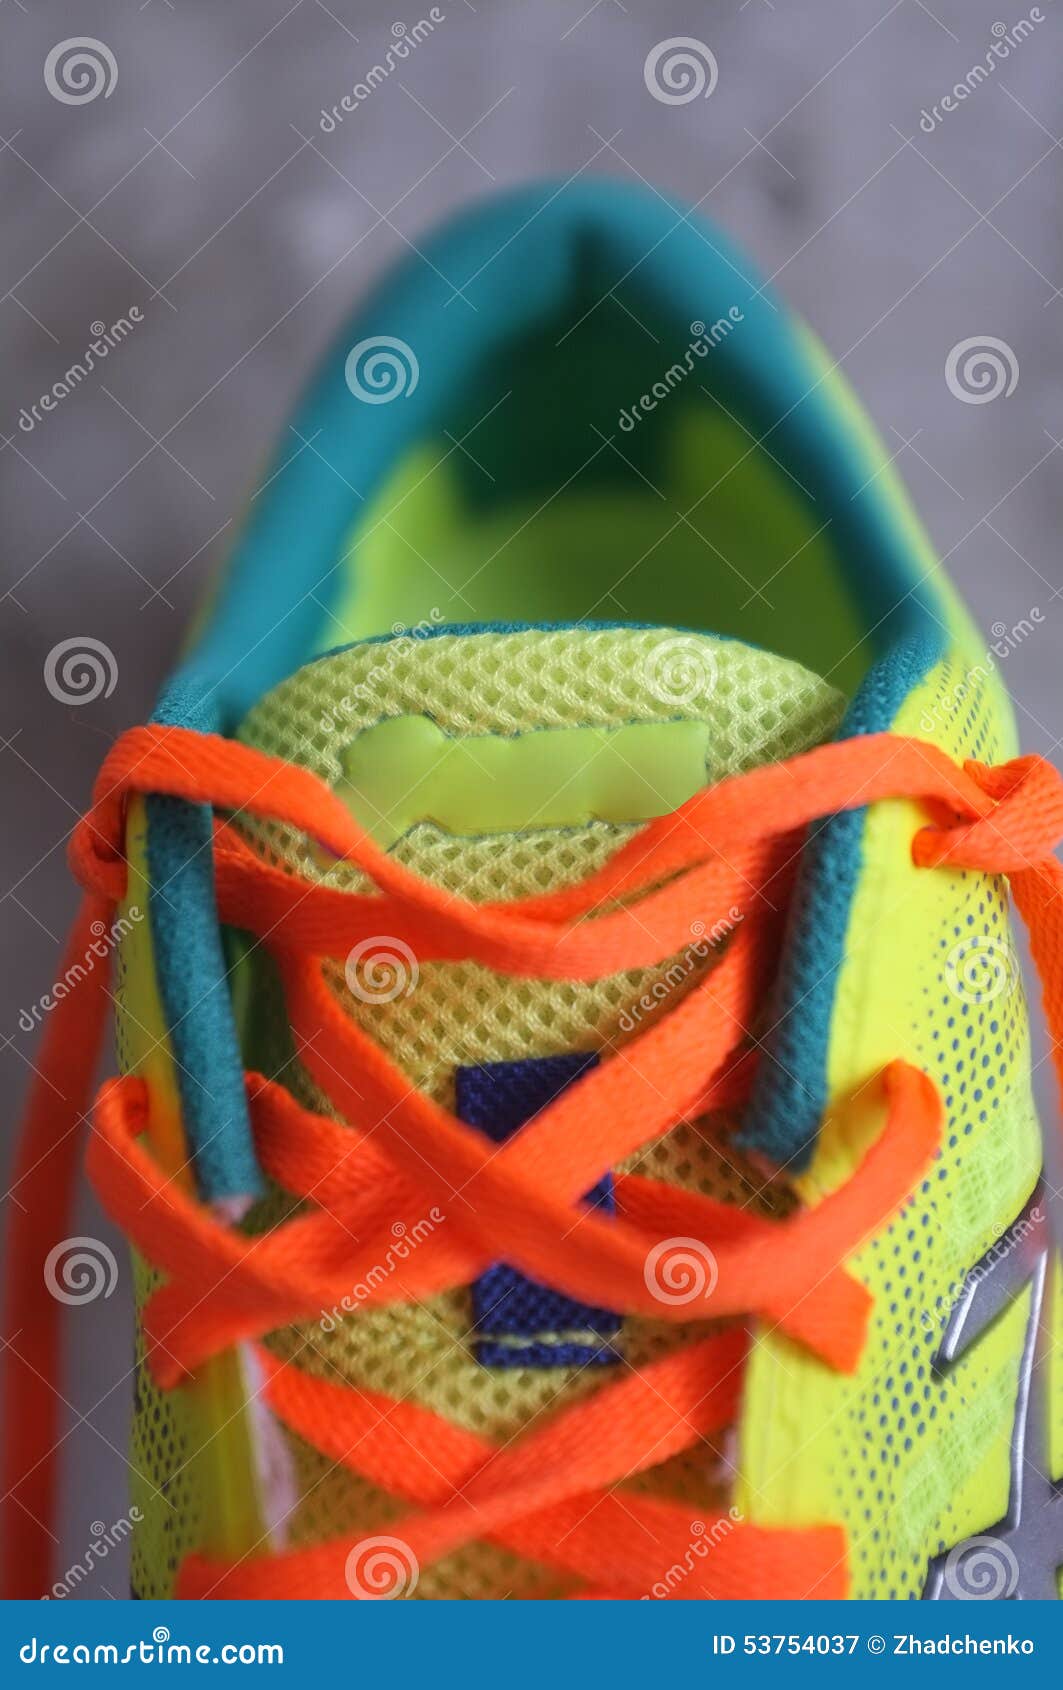 Details sneaker or trainer stock image. Image of running - 53754037